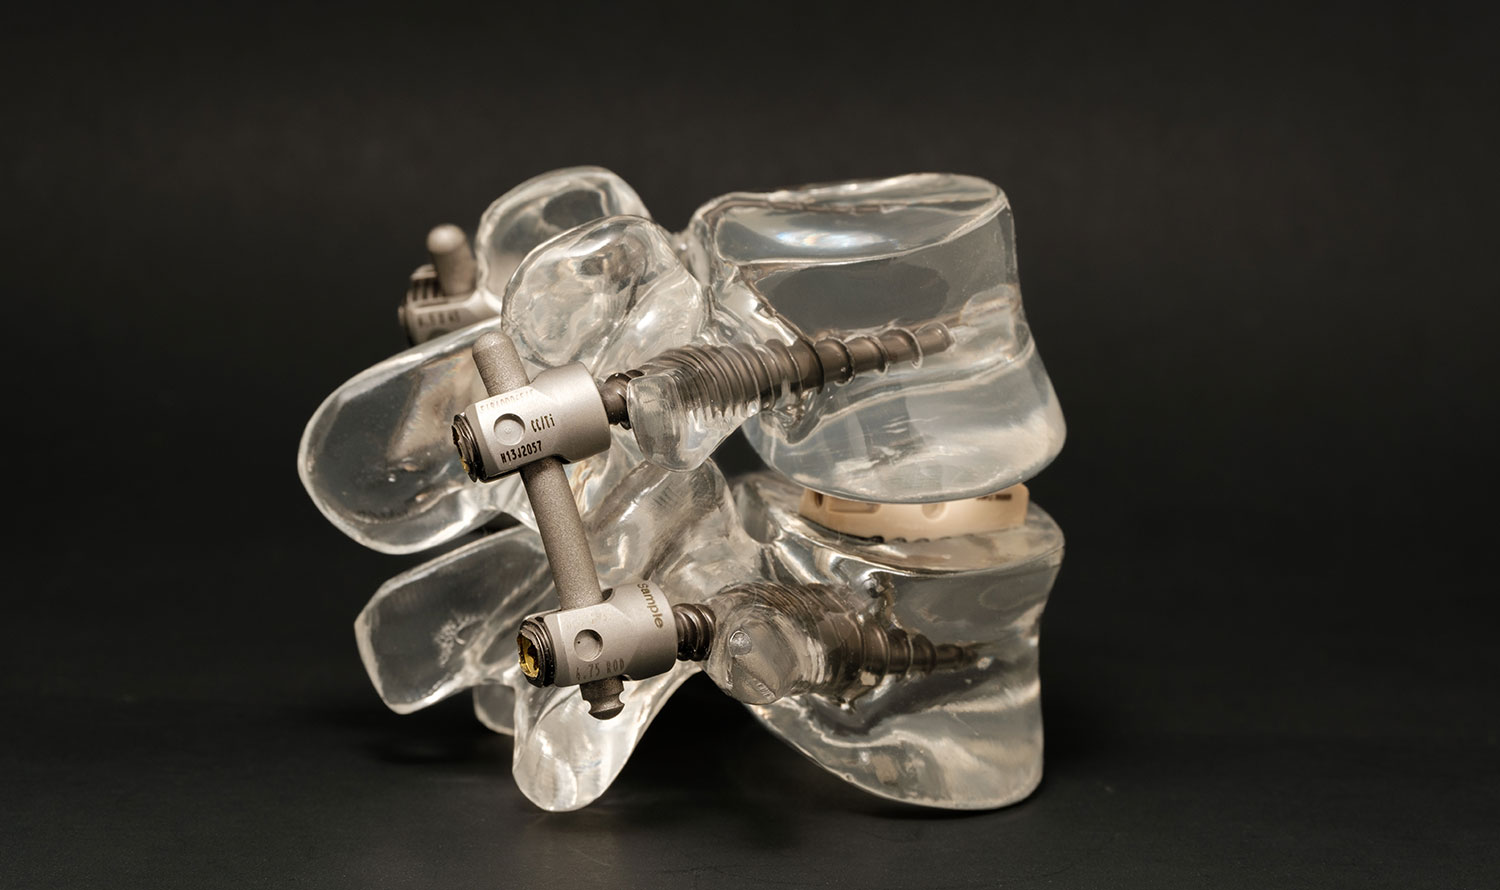 A transparent acrylic replica of the thoracic vertebral column crafted specifically for neurosurgical elucidation.